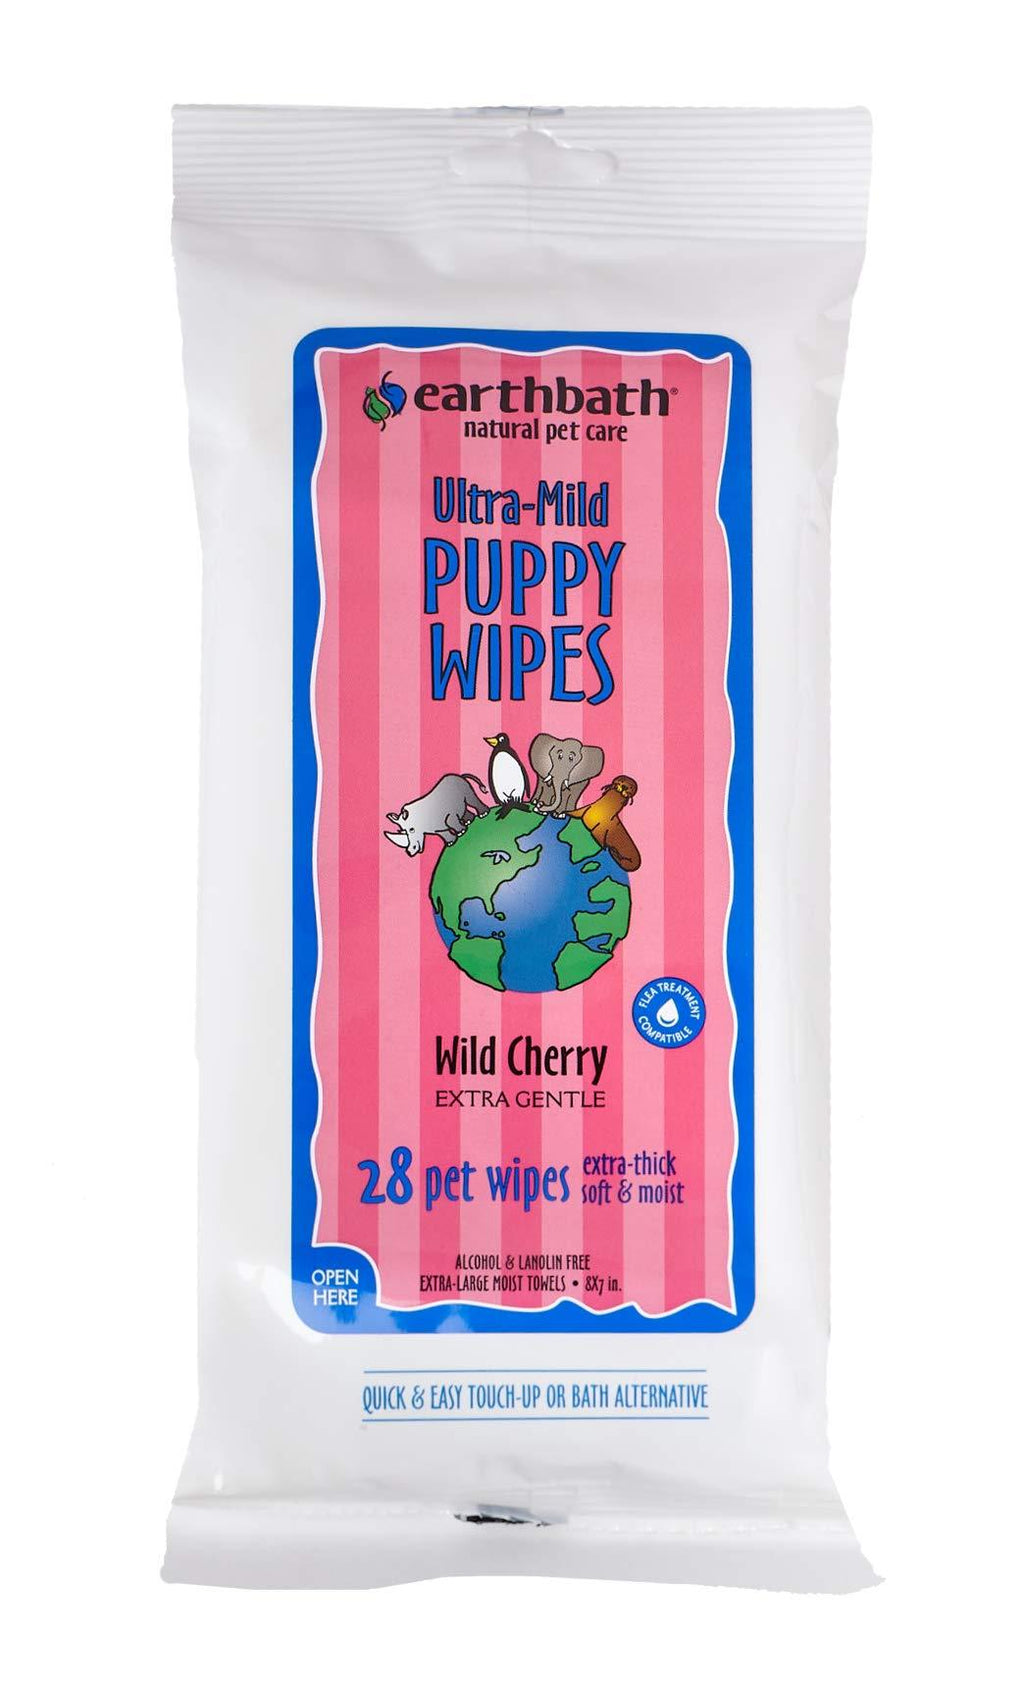 [Australia] - Earthbath All Natural Grooming Wipes, Puppy - Pack of 1 